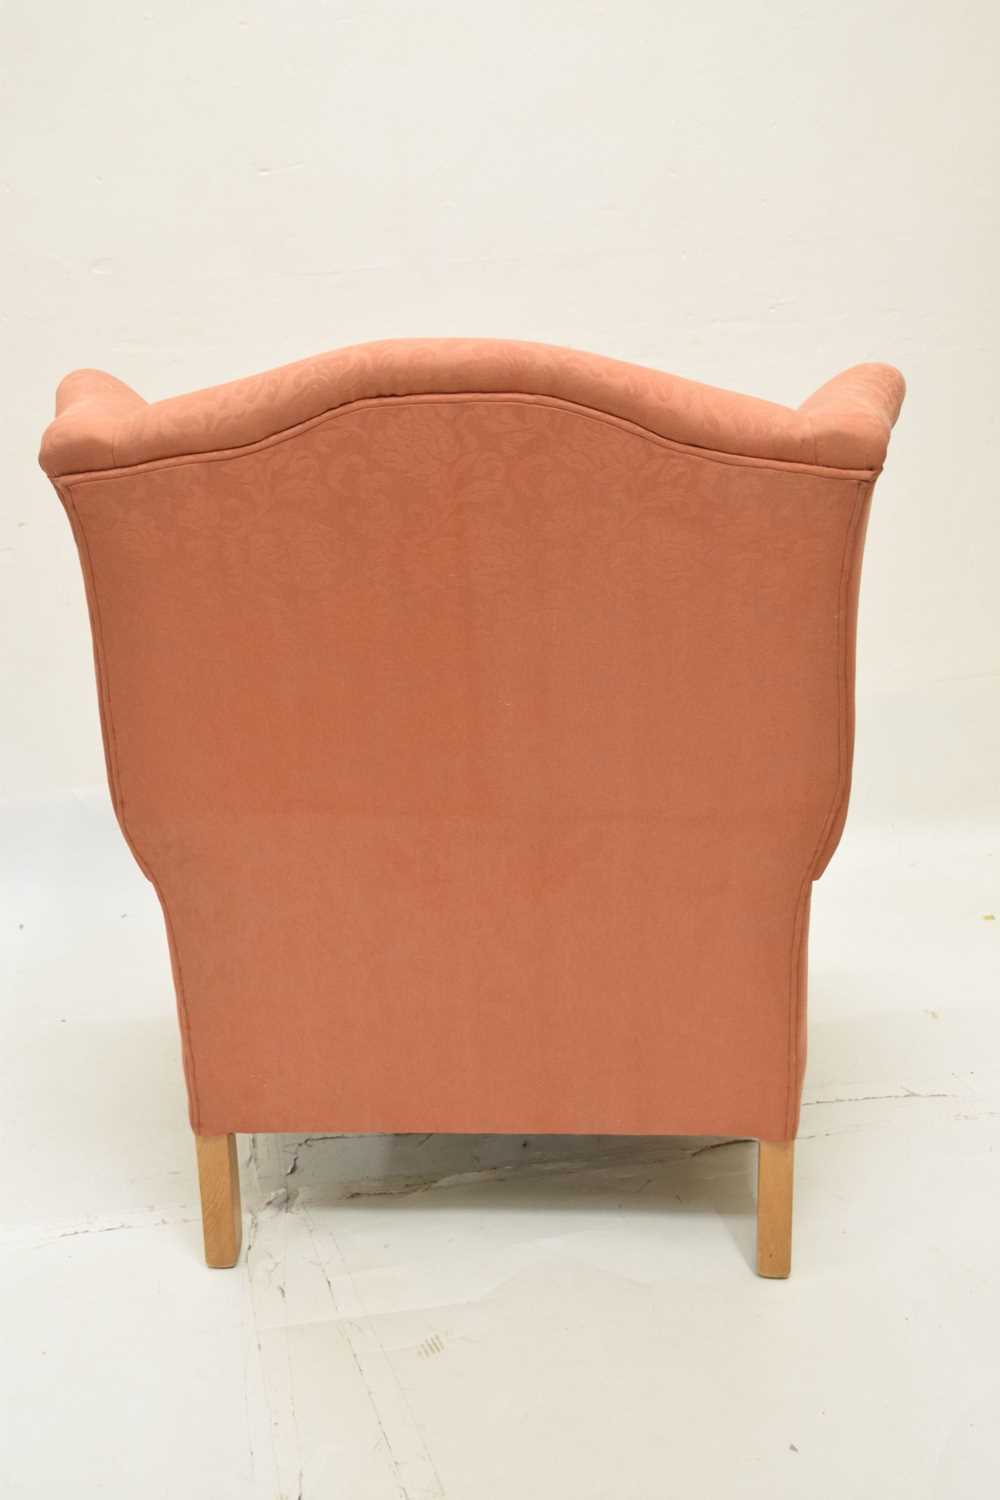 Laura Ashley wing armchair - Image 5 of 6